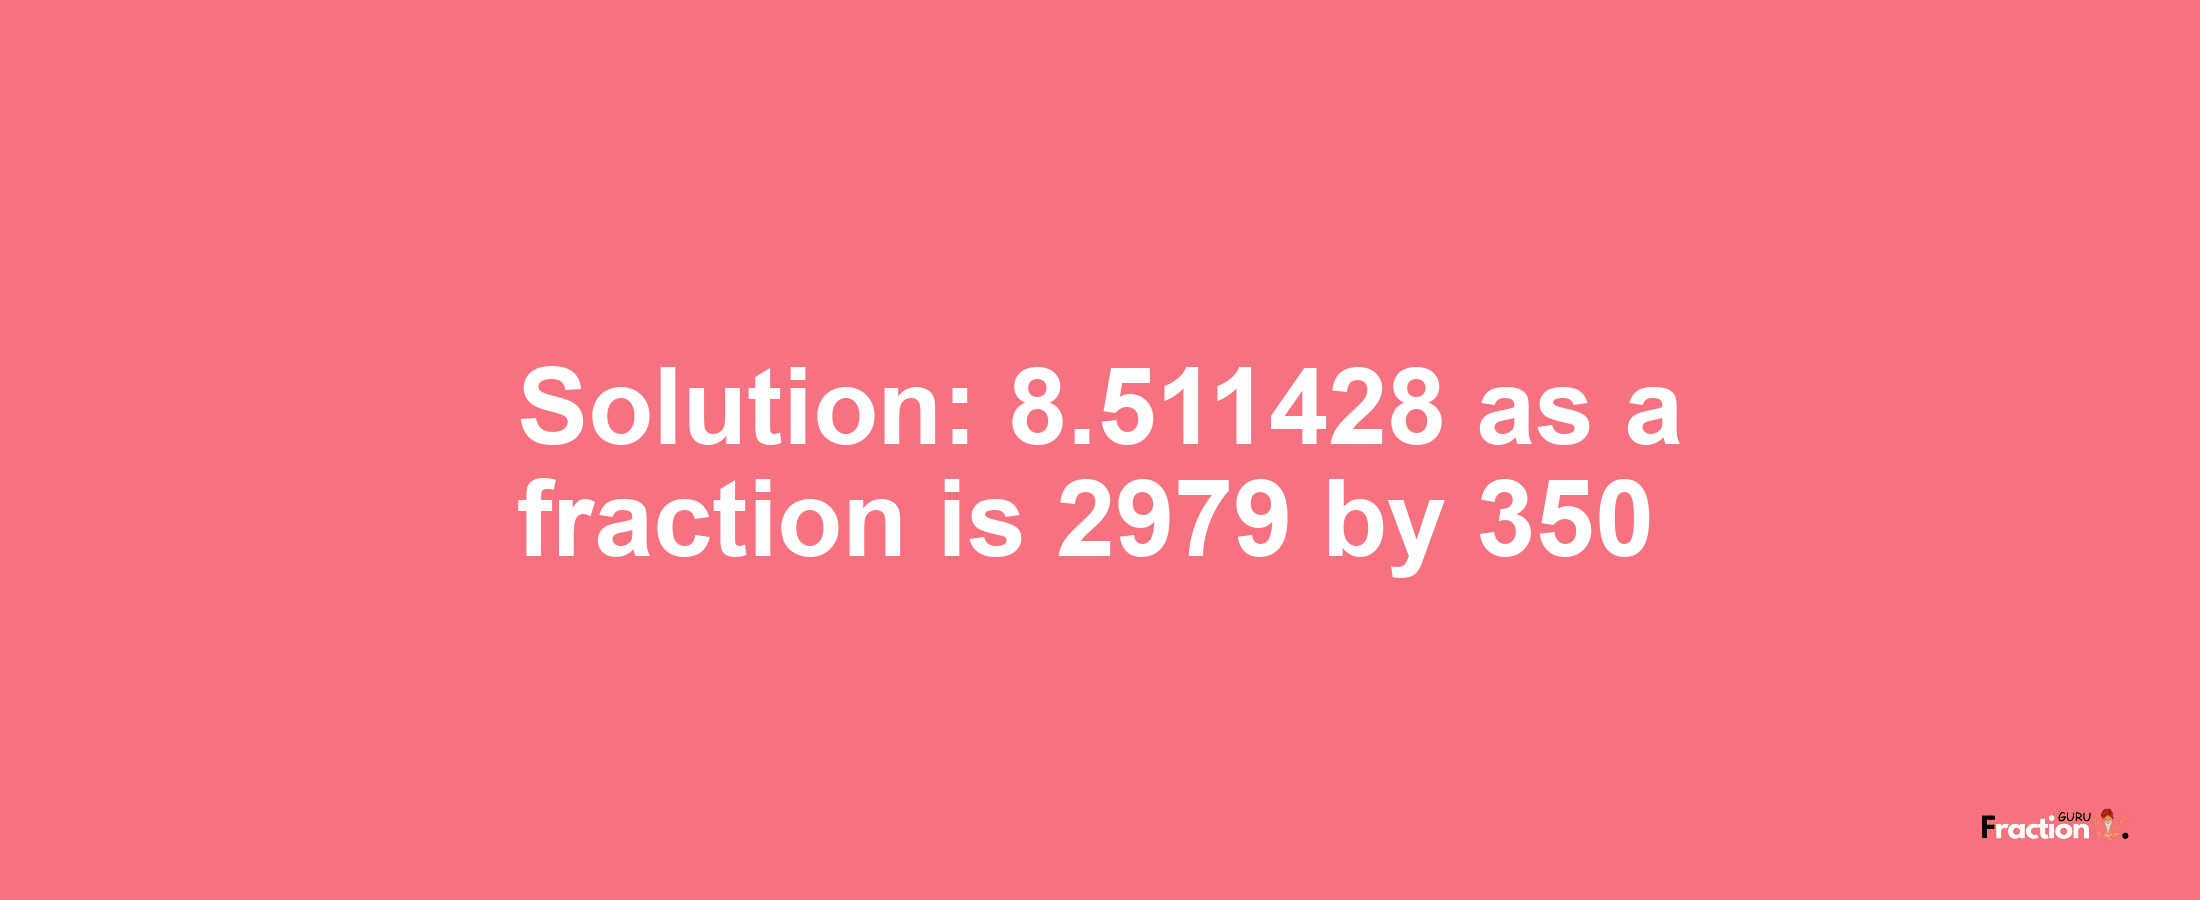 Solution:8.511428 as a fraction is 2979/350